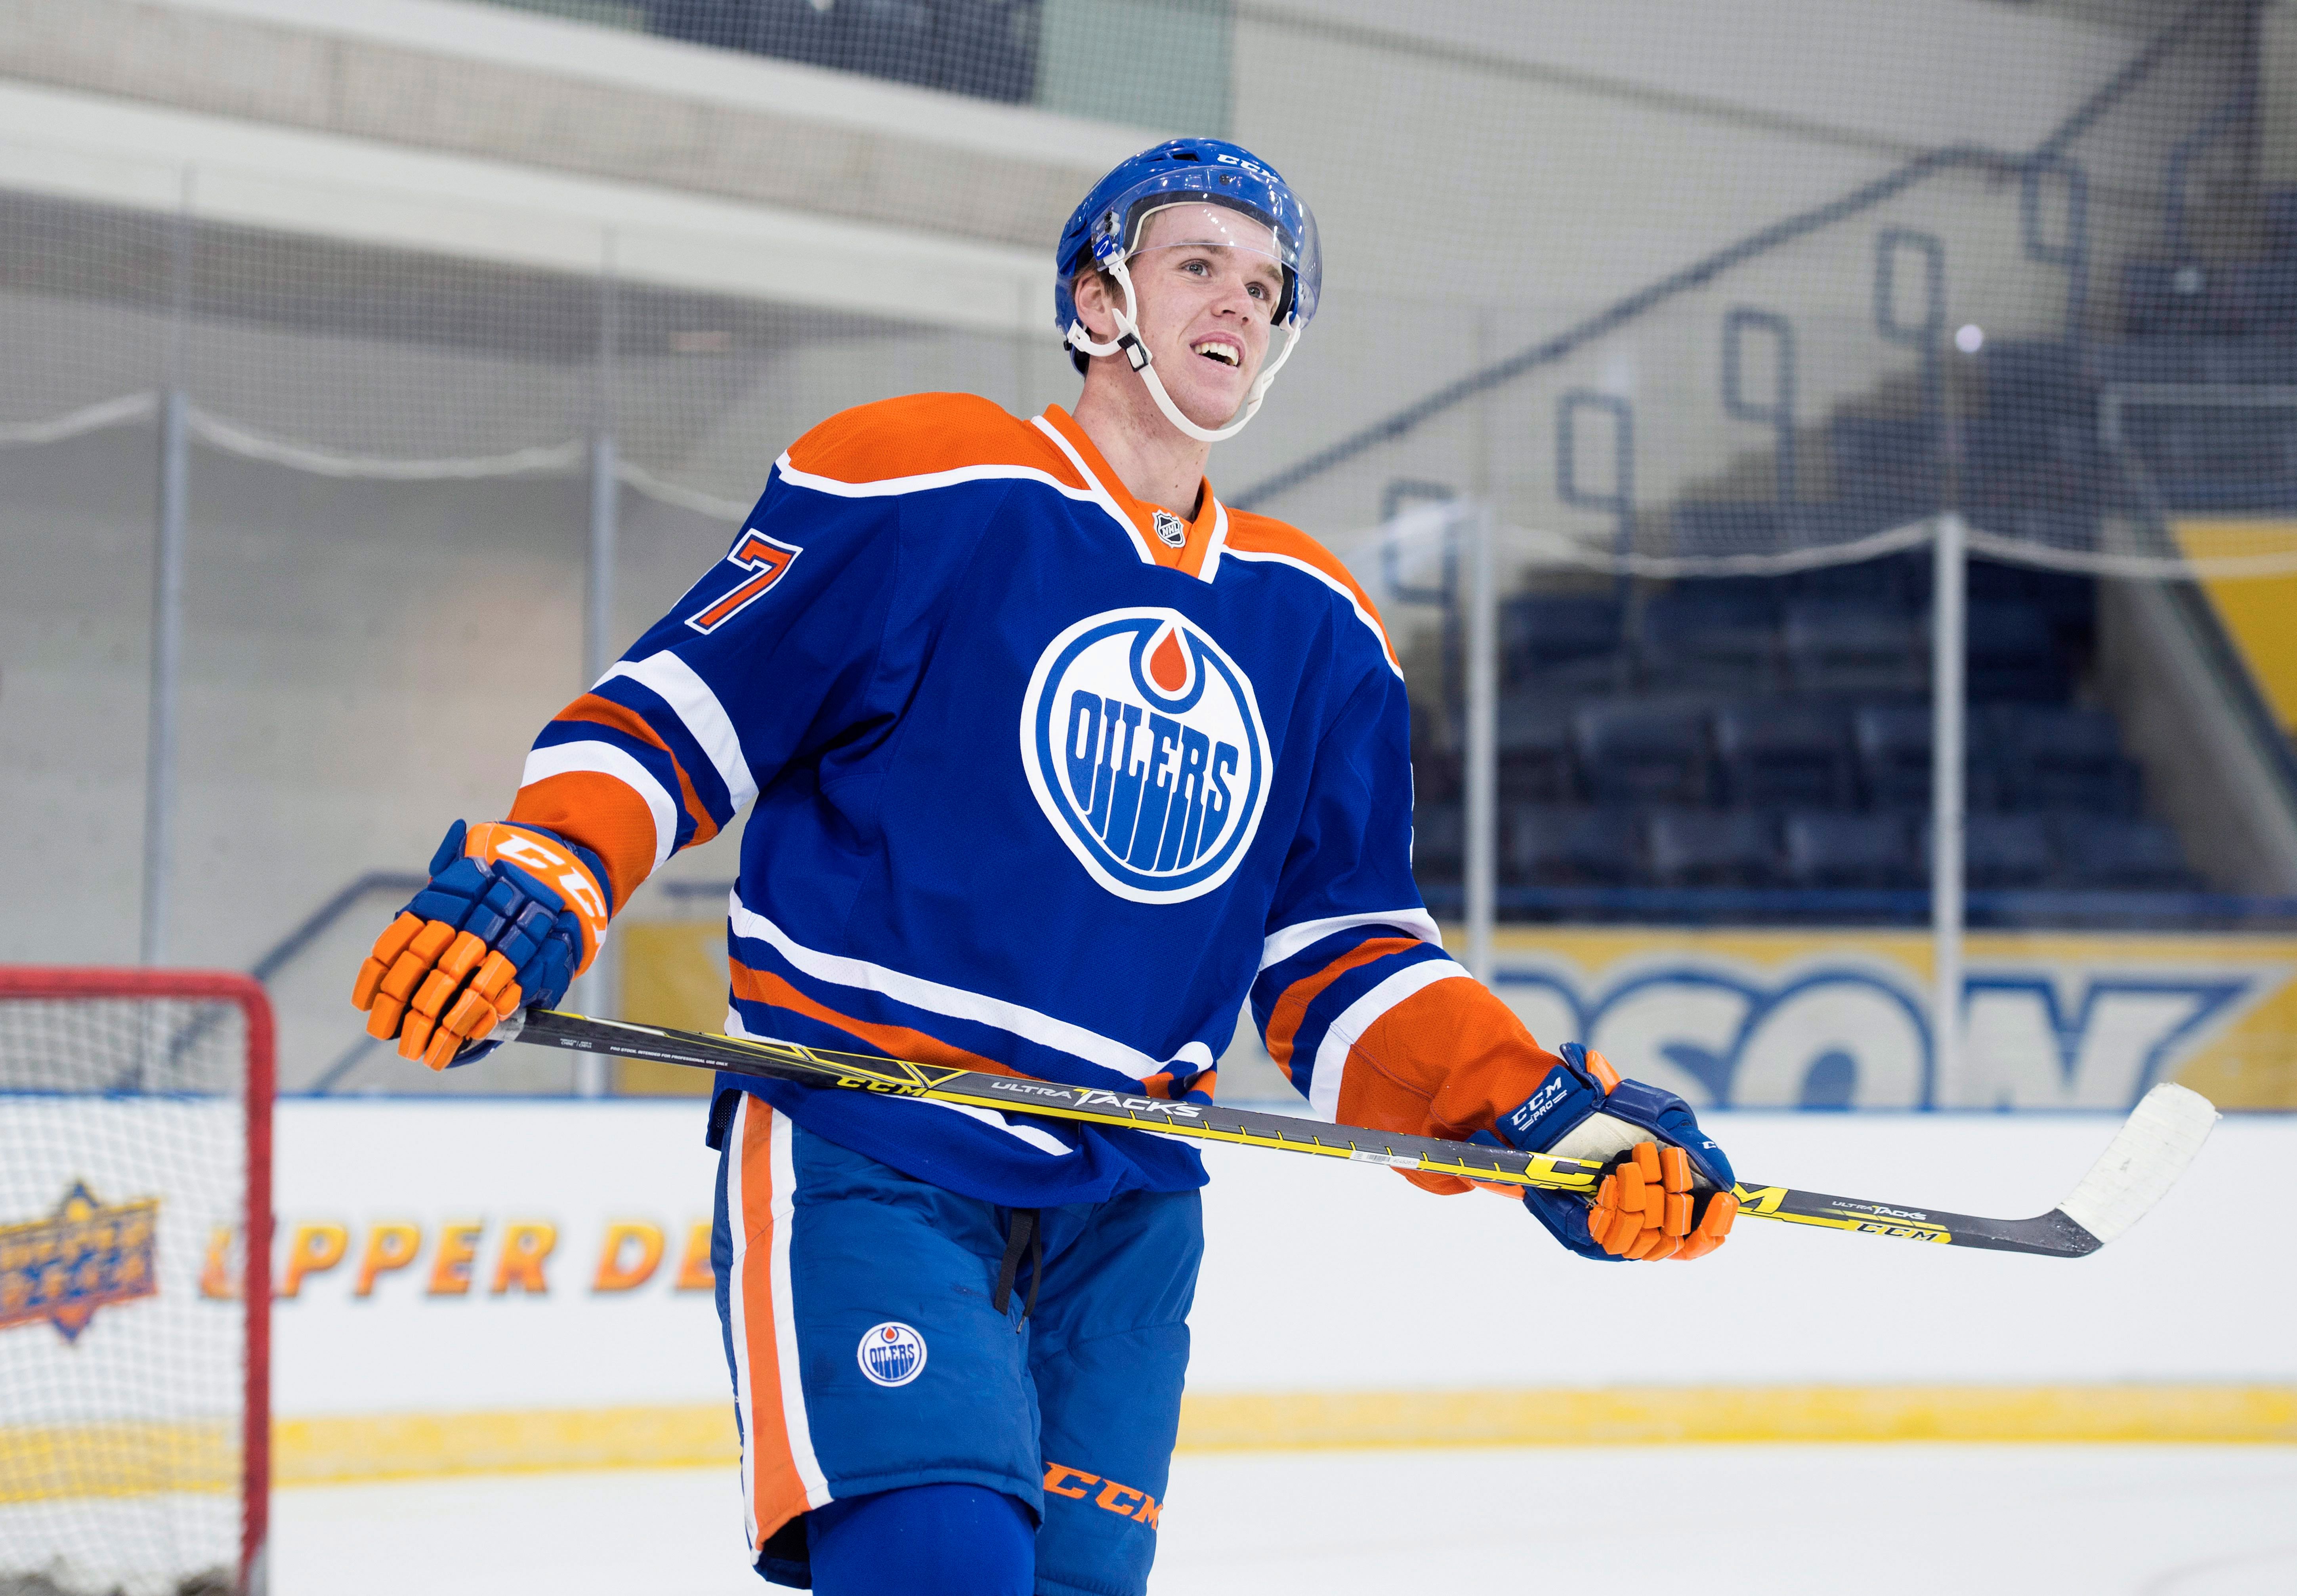 Prime prospect Connor McDavid prepares for rookie season in NHL The Seattle Times